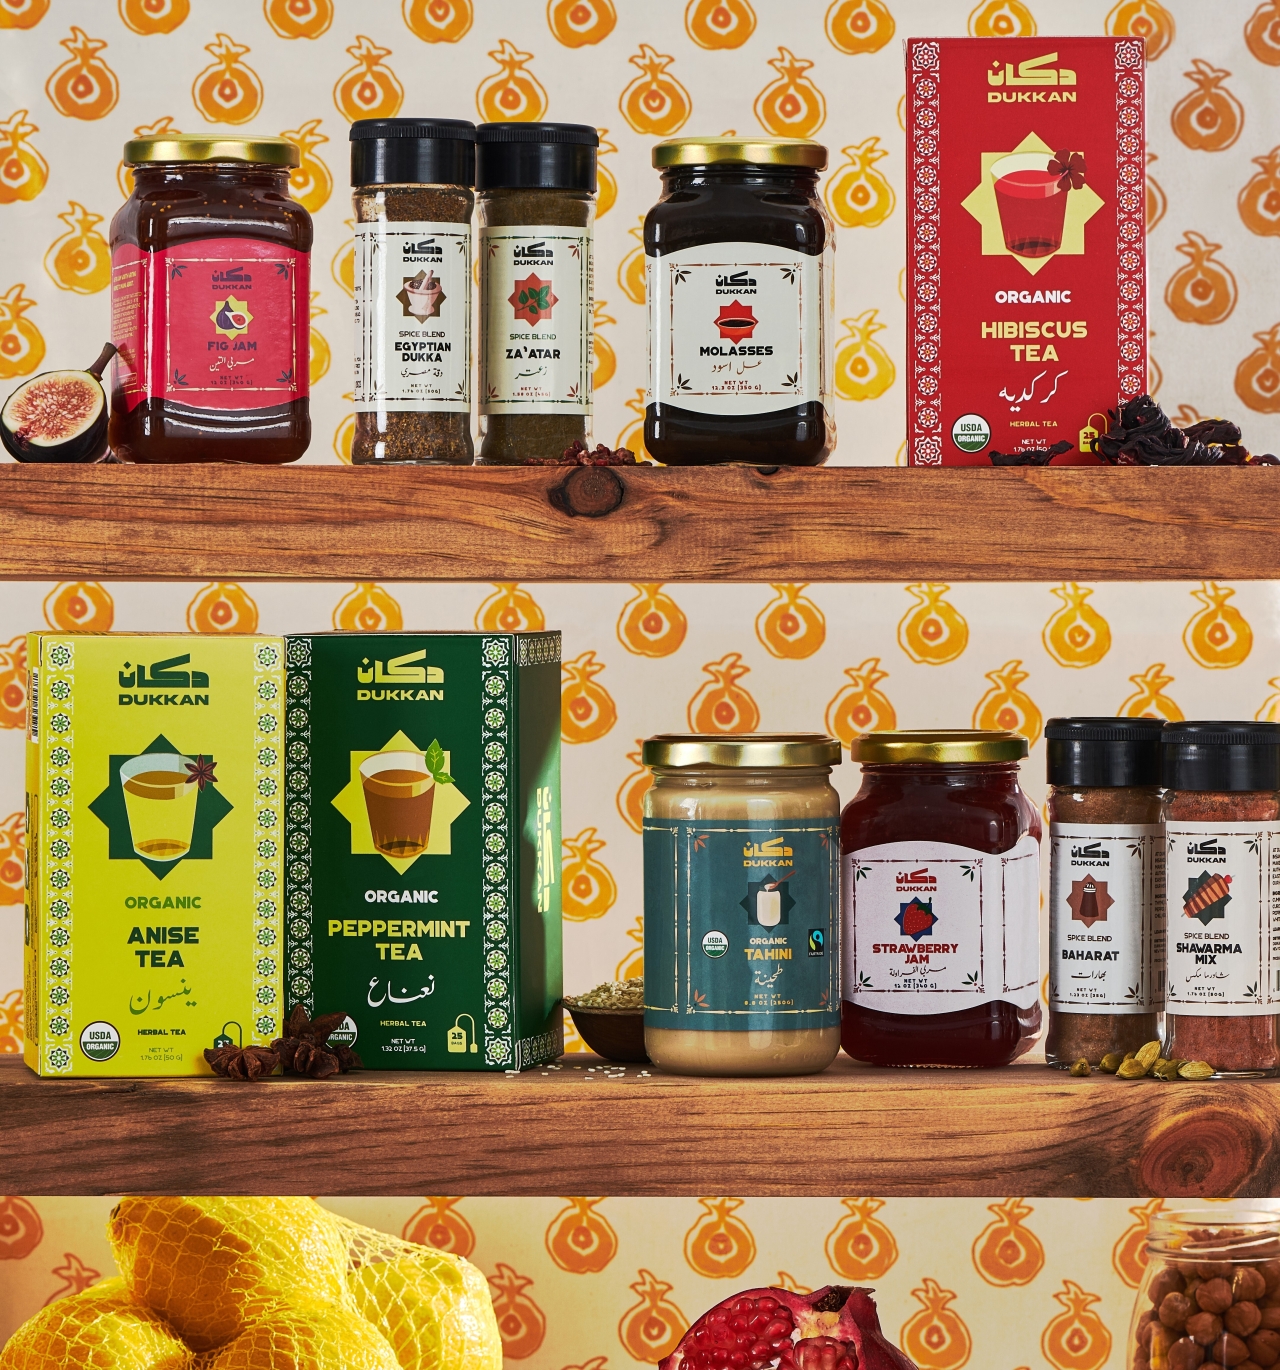 Dukkan products